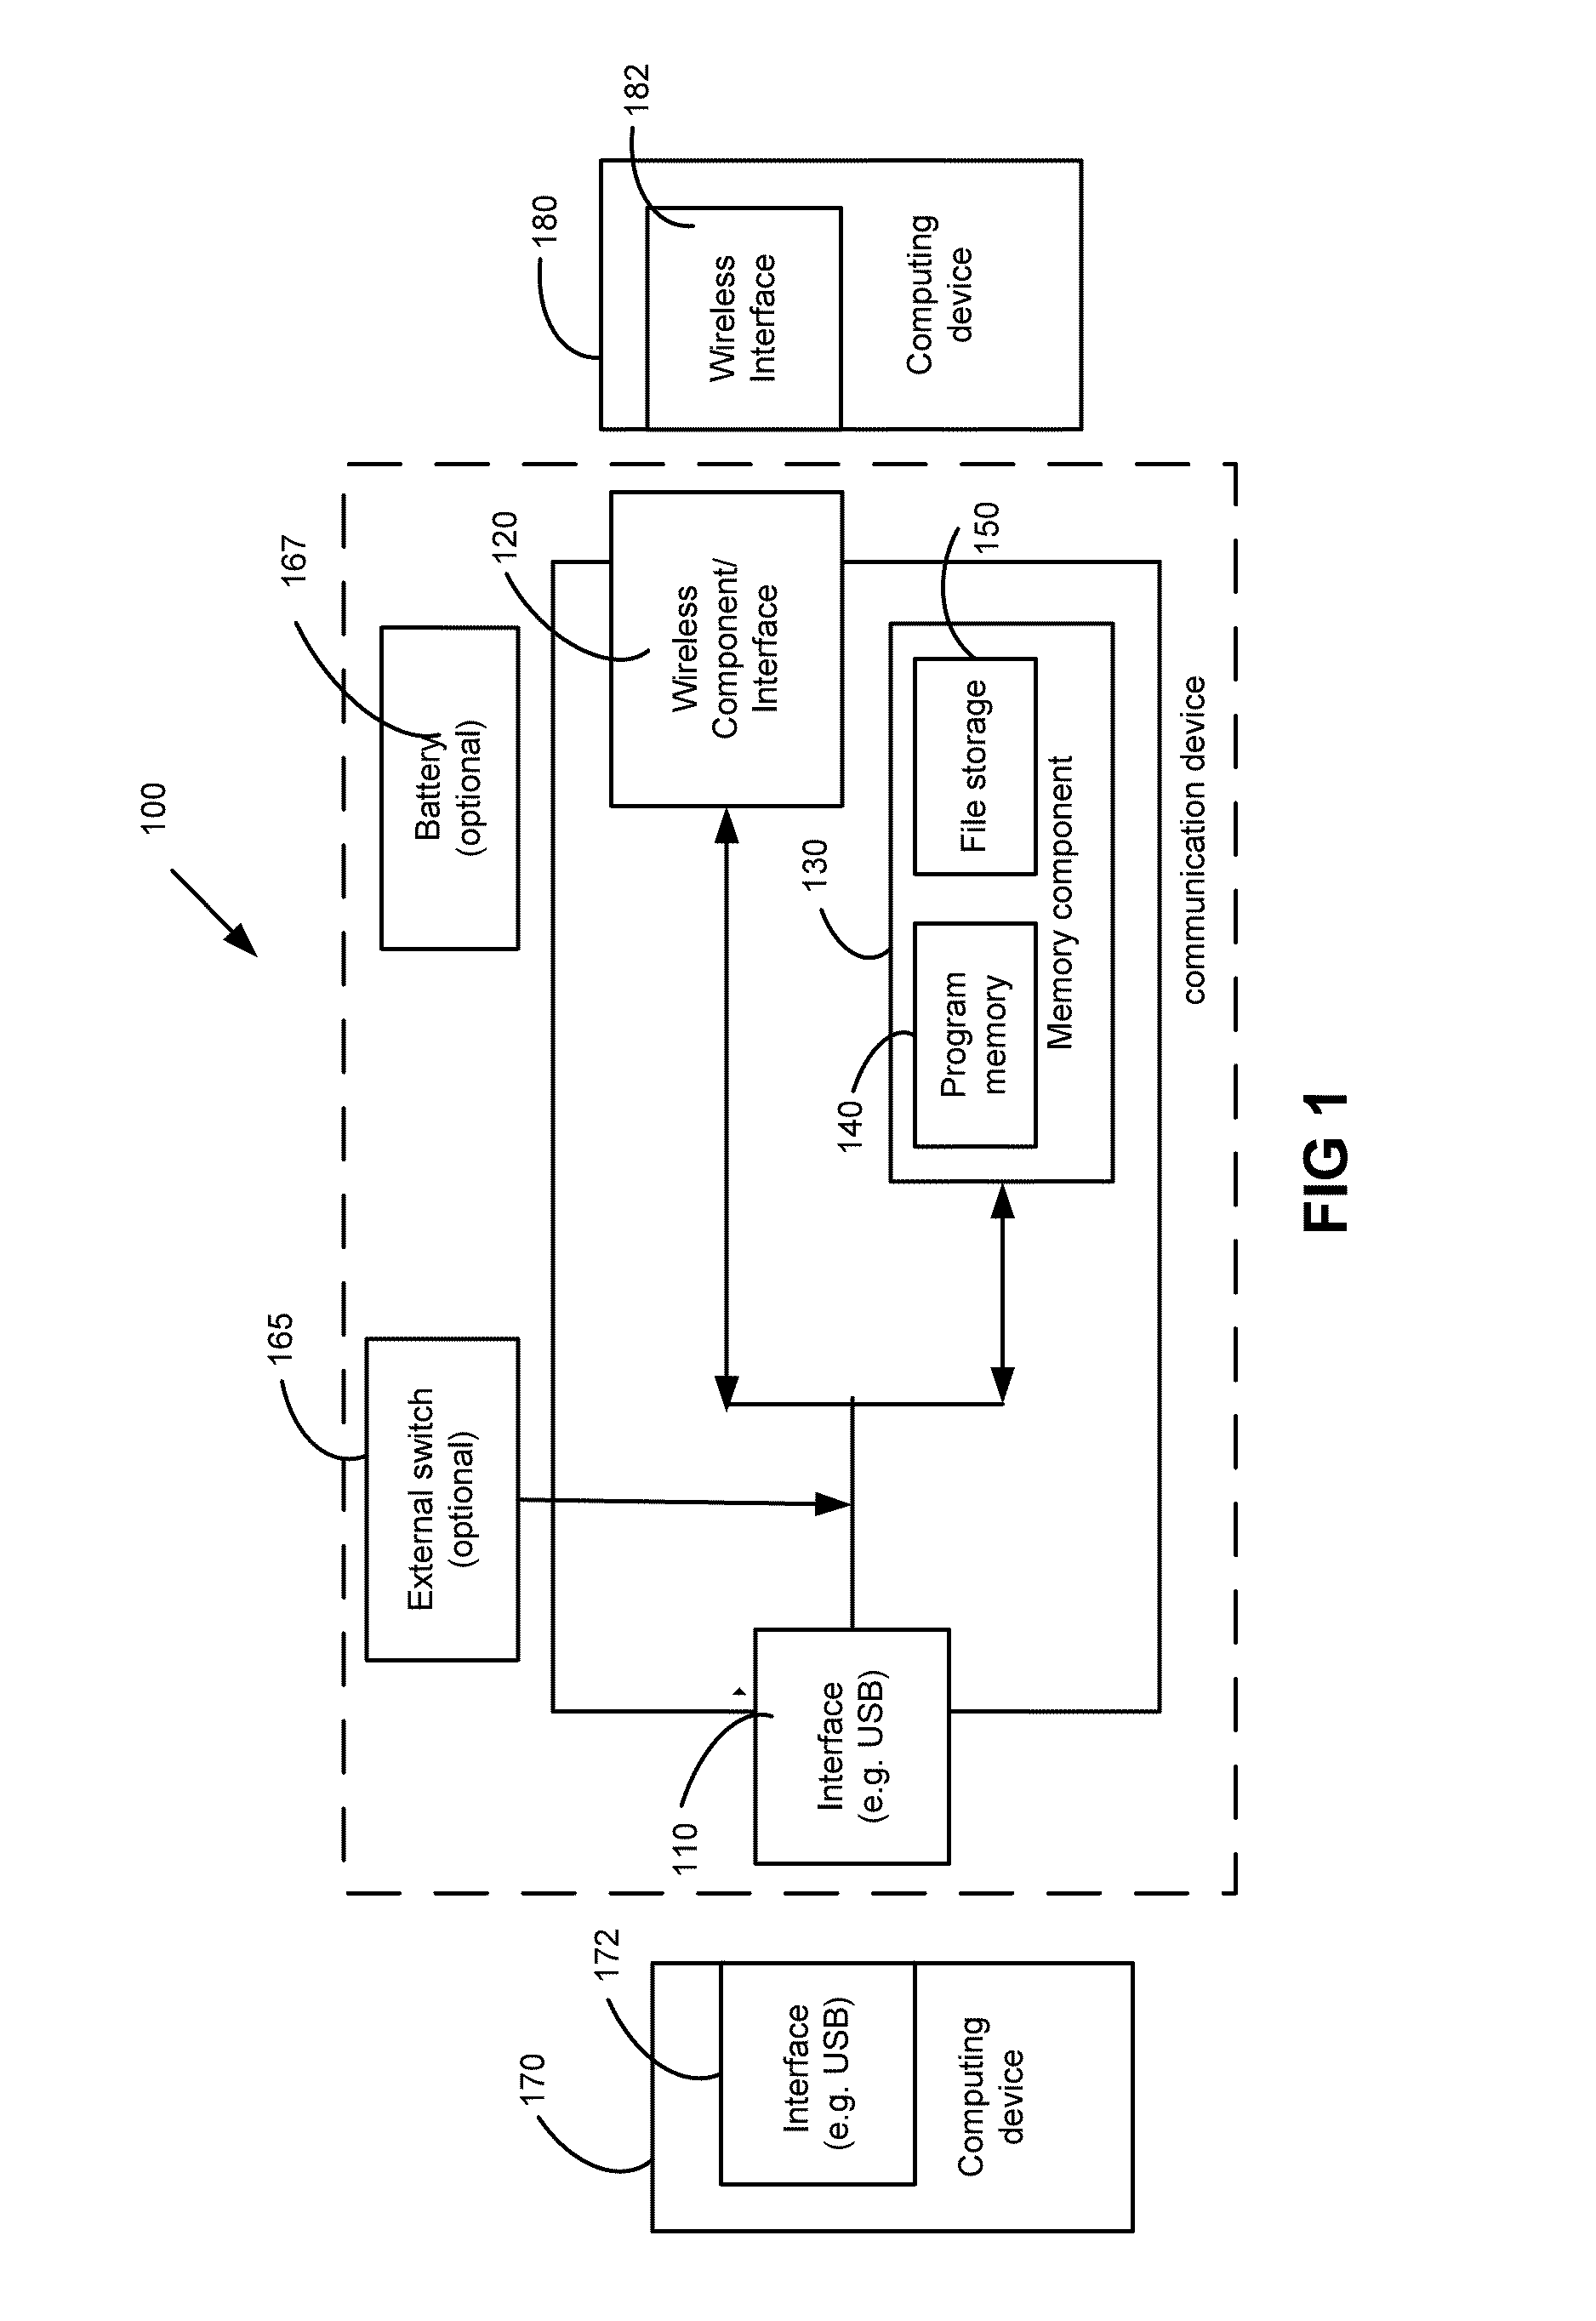 Device for internet access and for communication